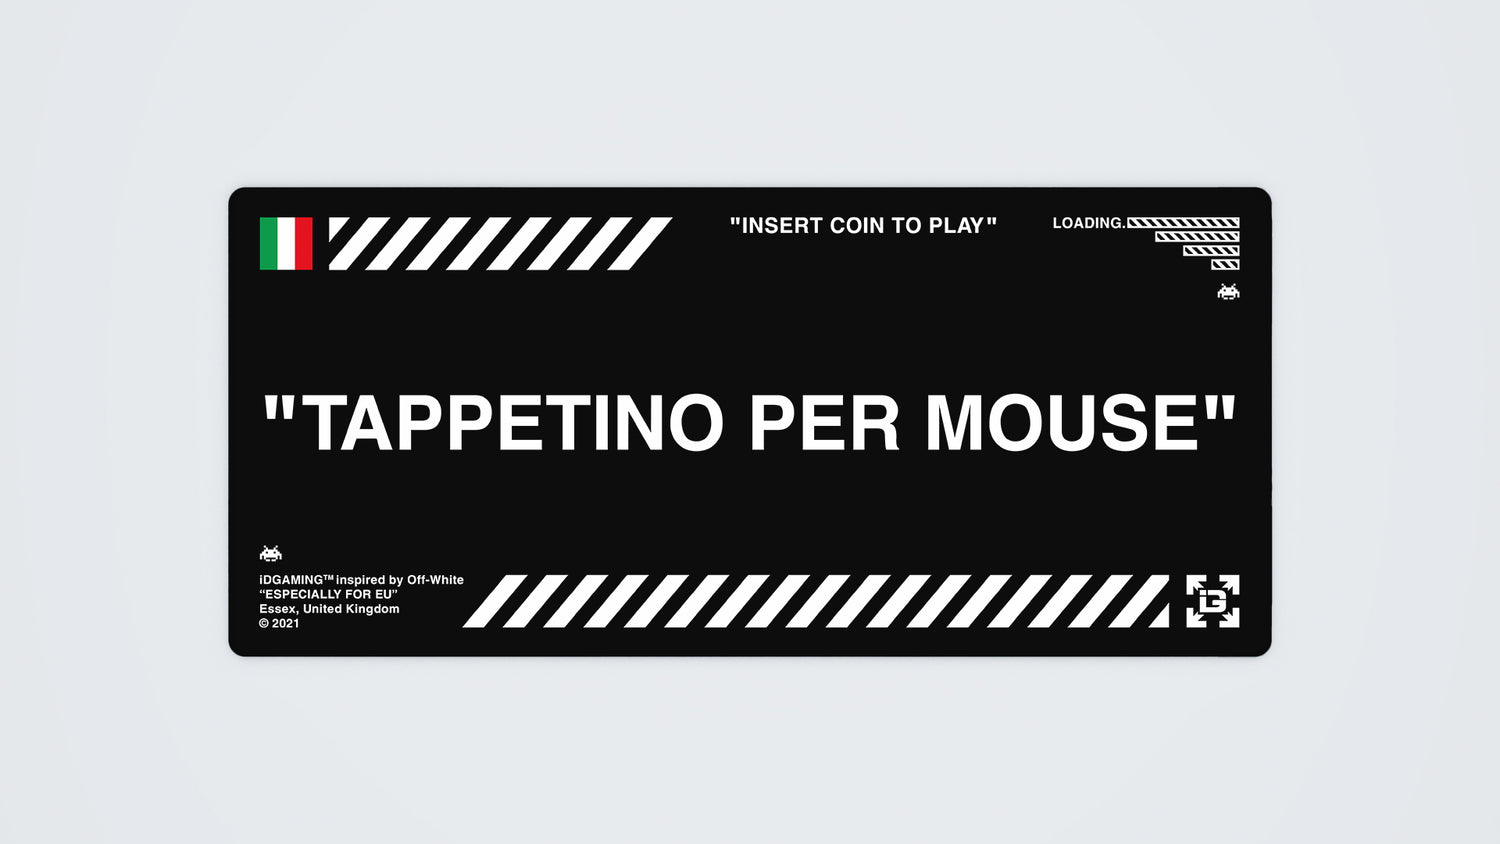 TAPPETINO PER MOUSE